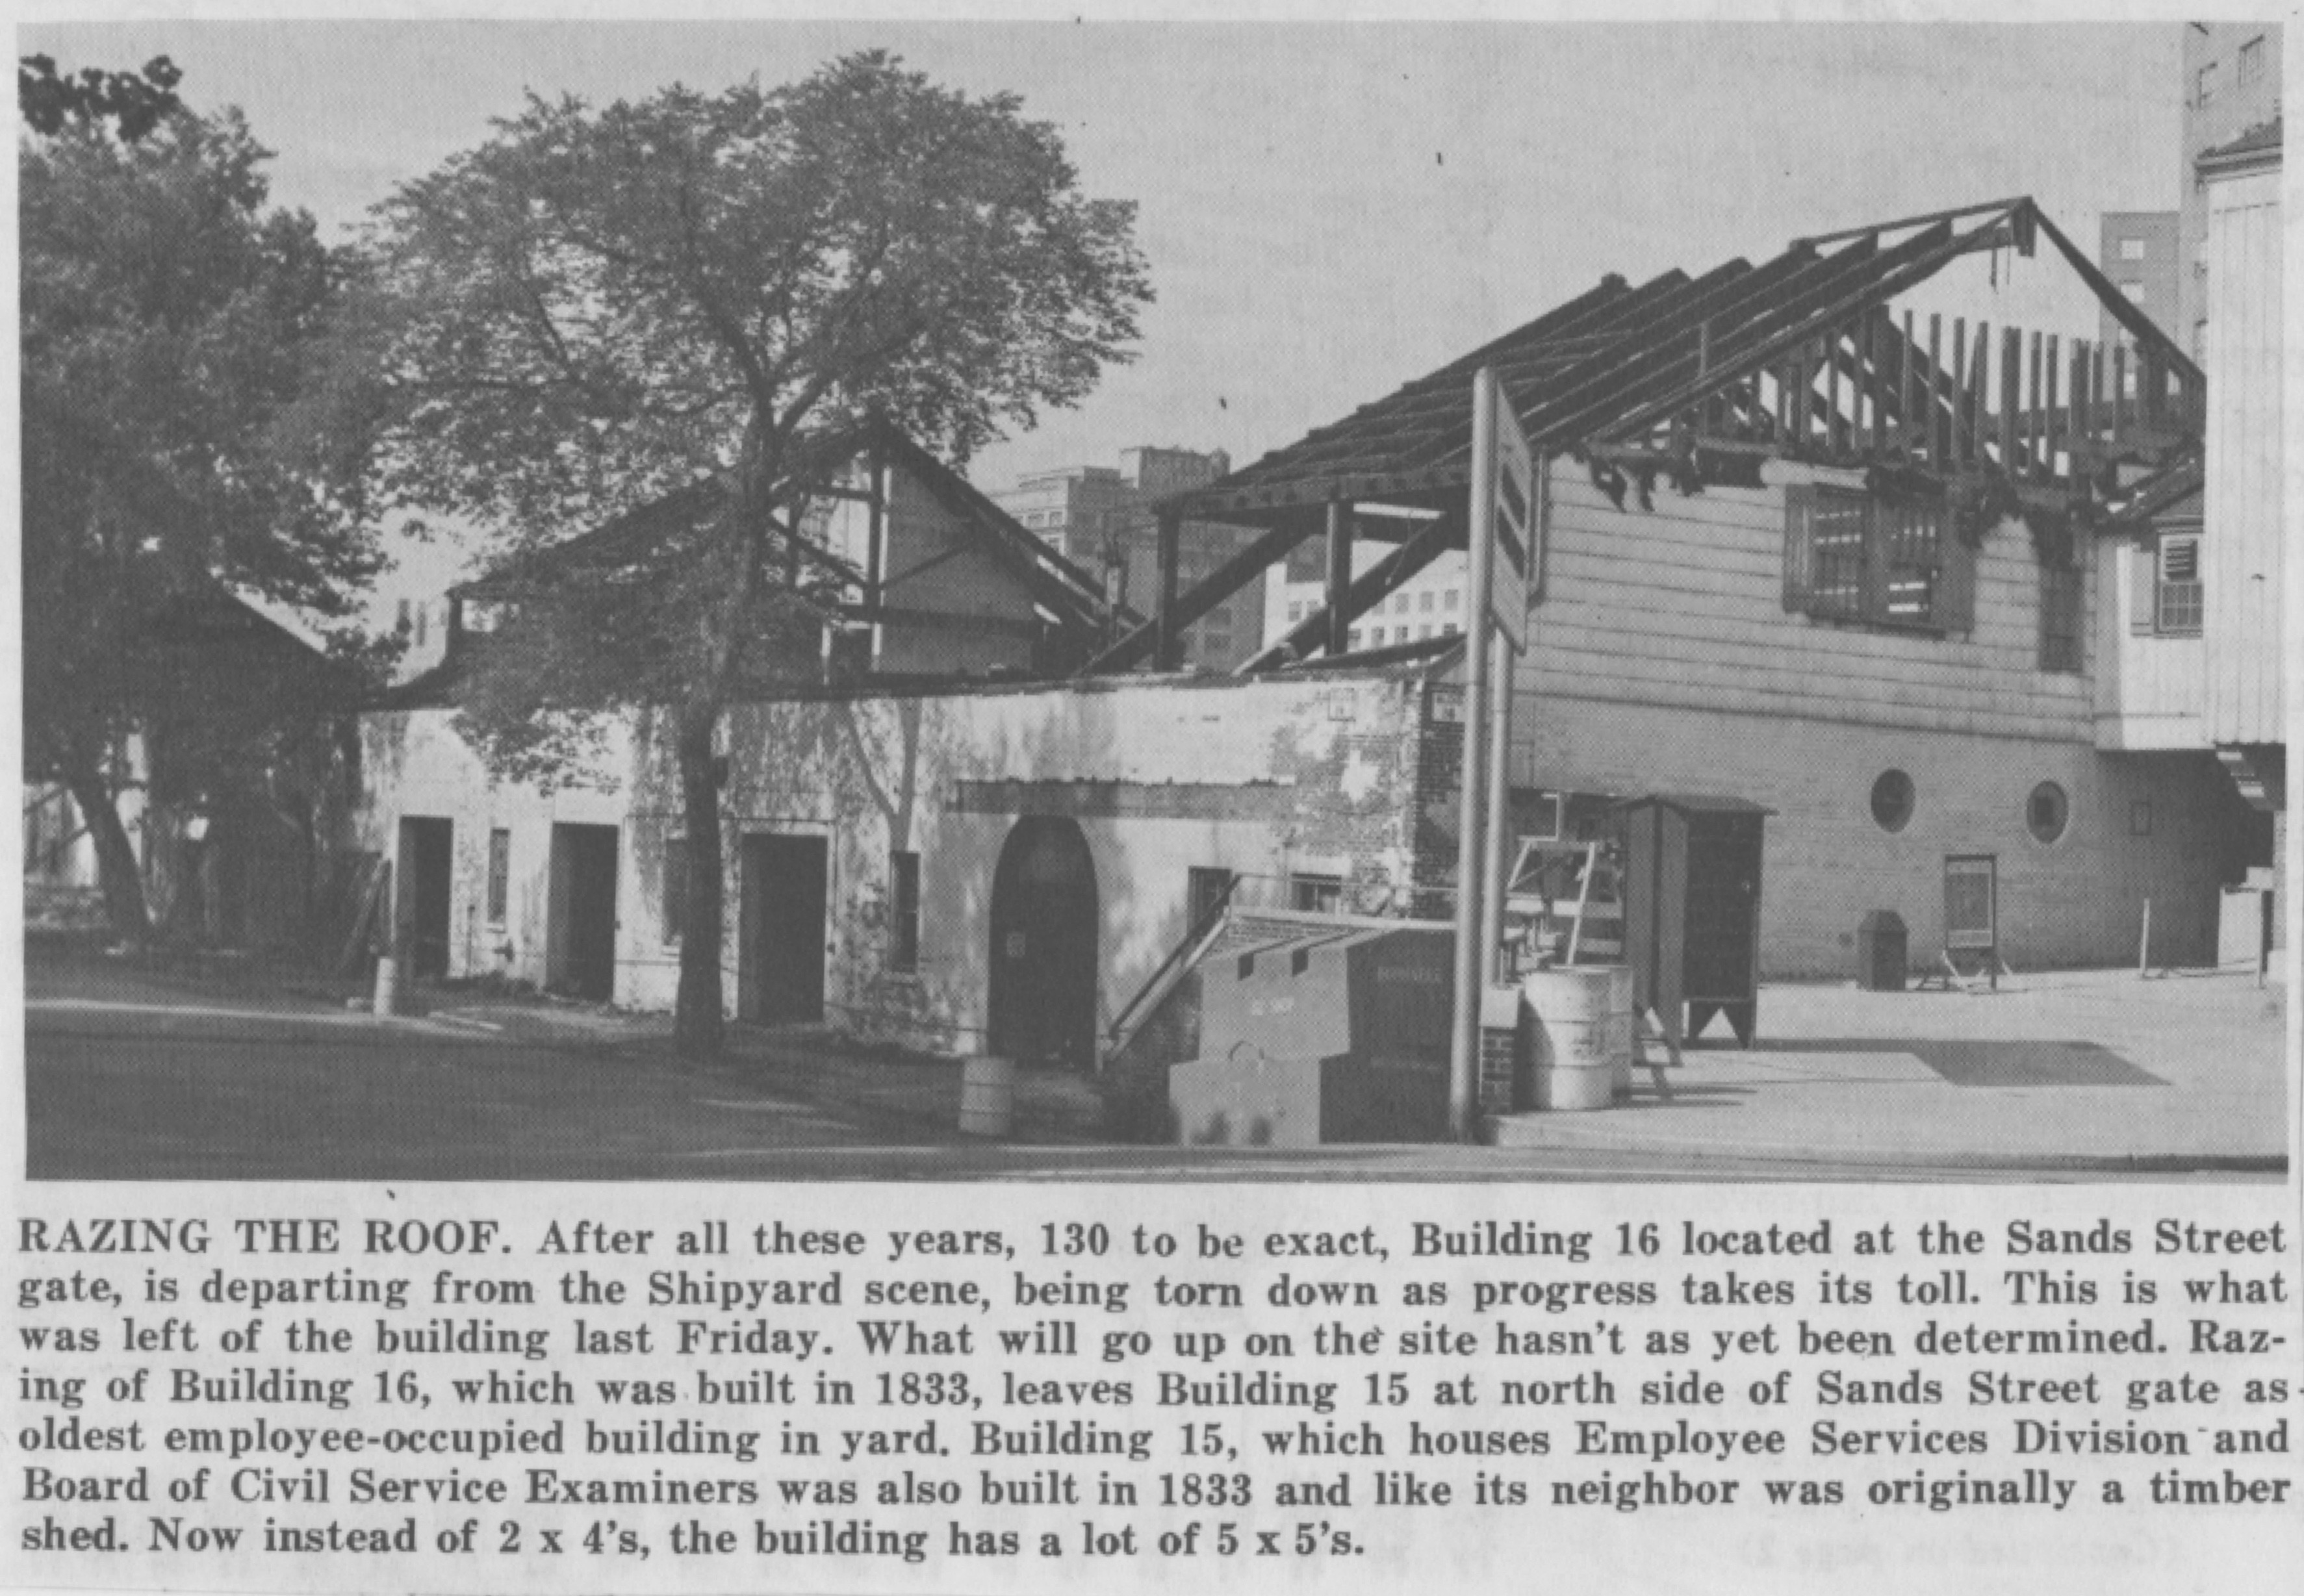 Newspaper clipping with photograph showing the Timber Shed with its roof partially demolished.